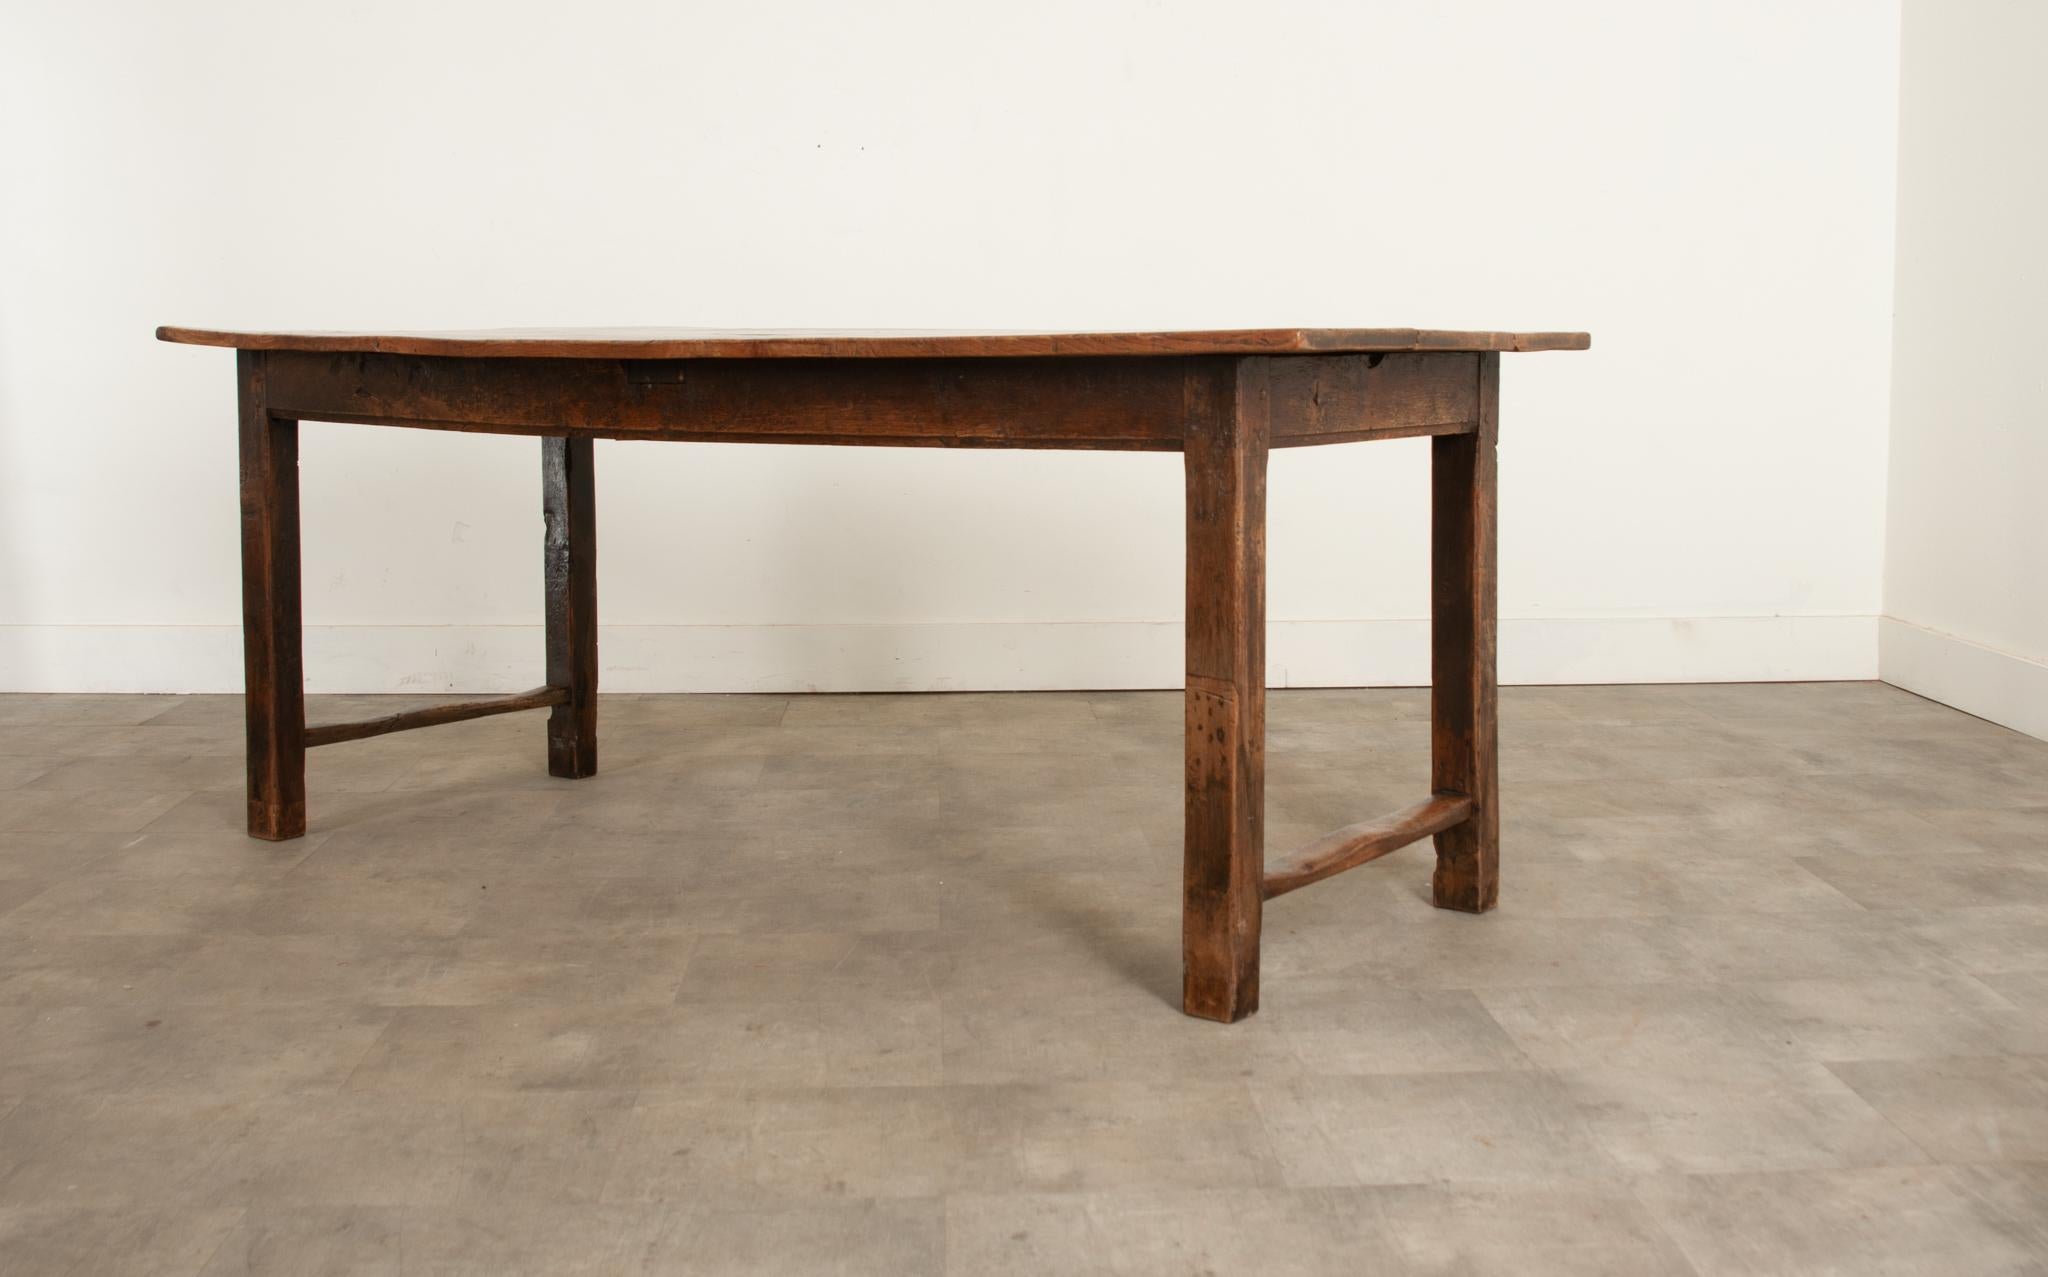 A very early 19th century English farmhouse table made from elm and ash. The top is made from solid elm planks supported on an ash base, which has a simple apron that follows down to streamlined and well supported squared legs. This table is well